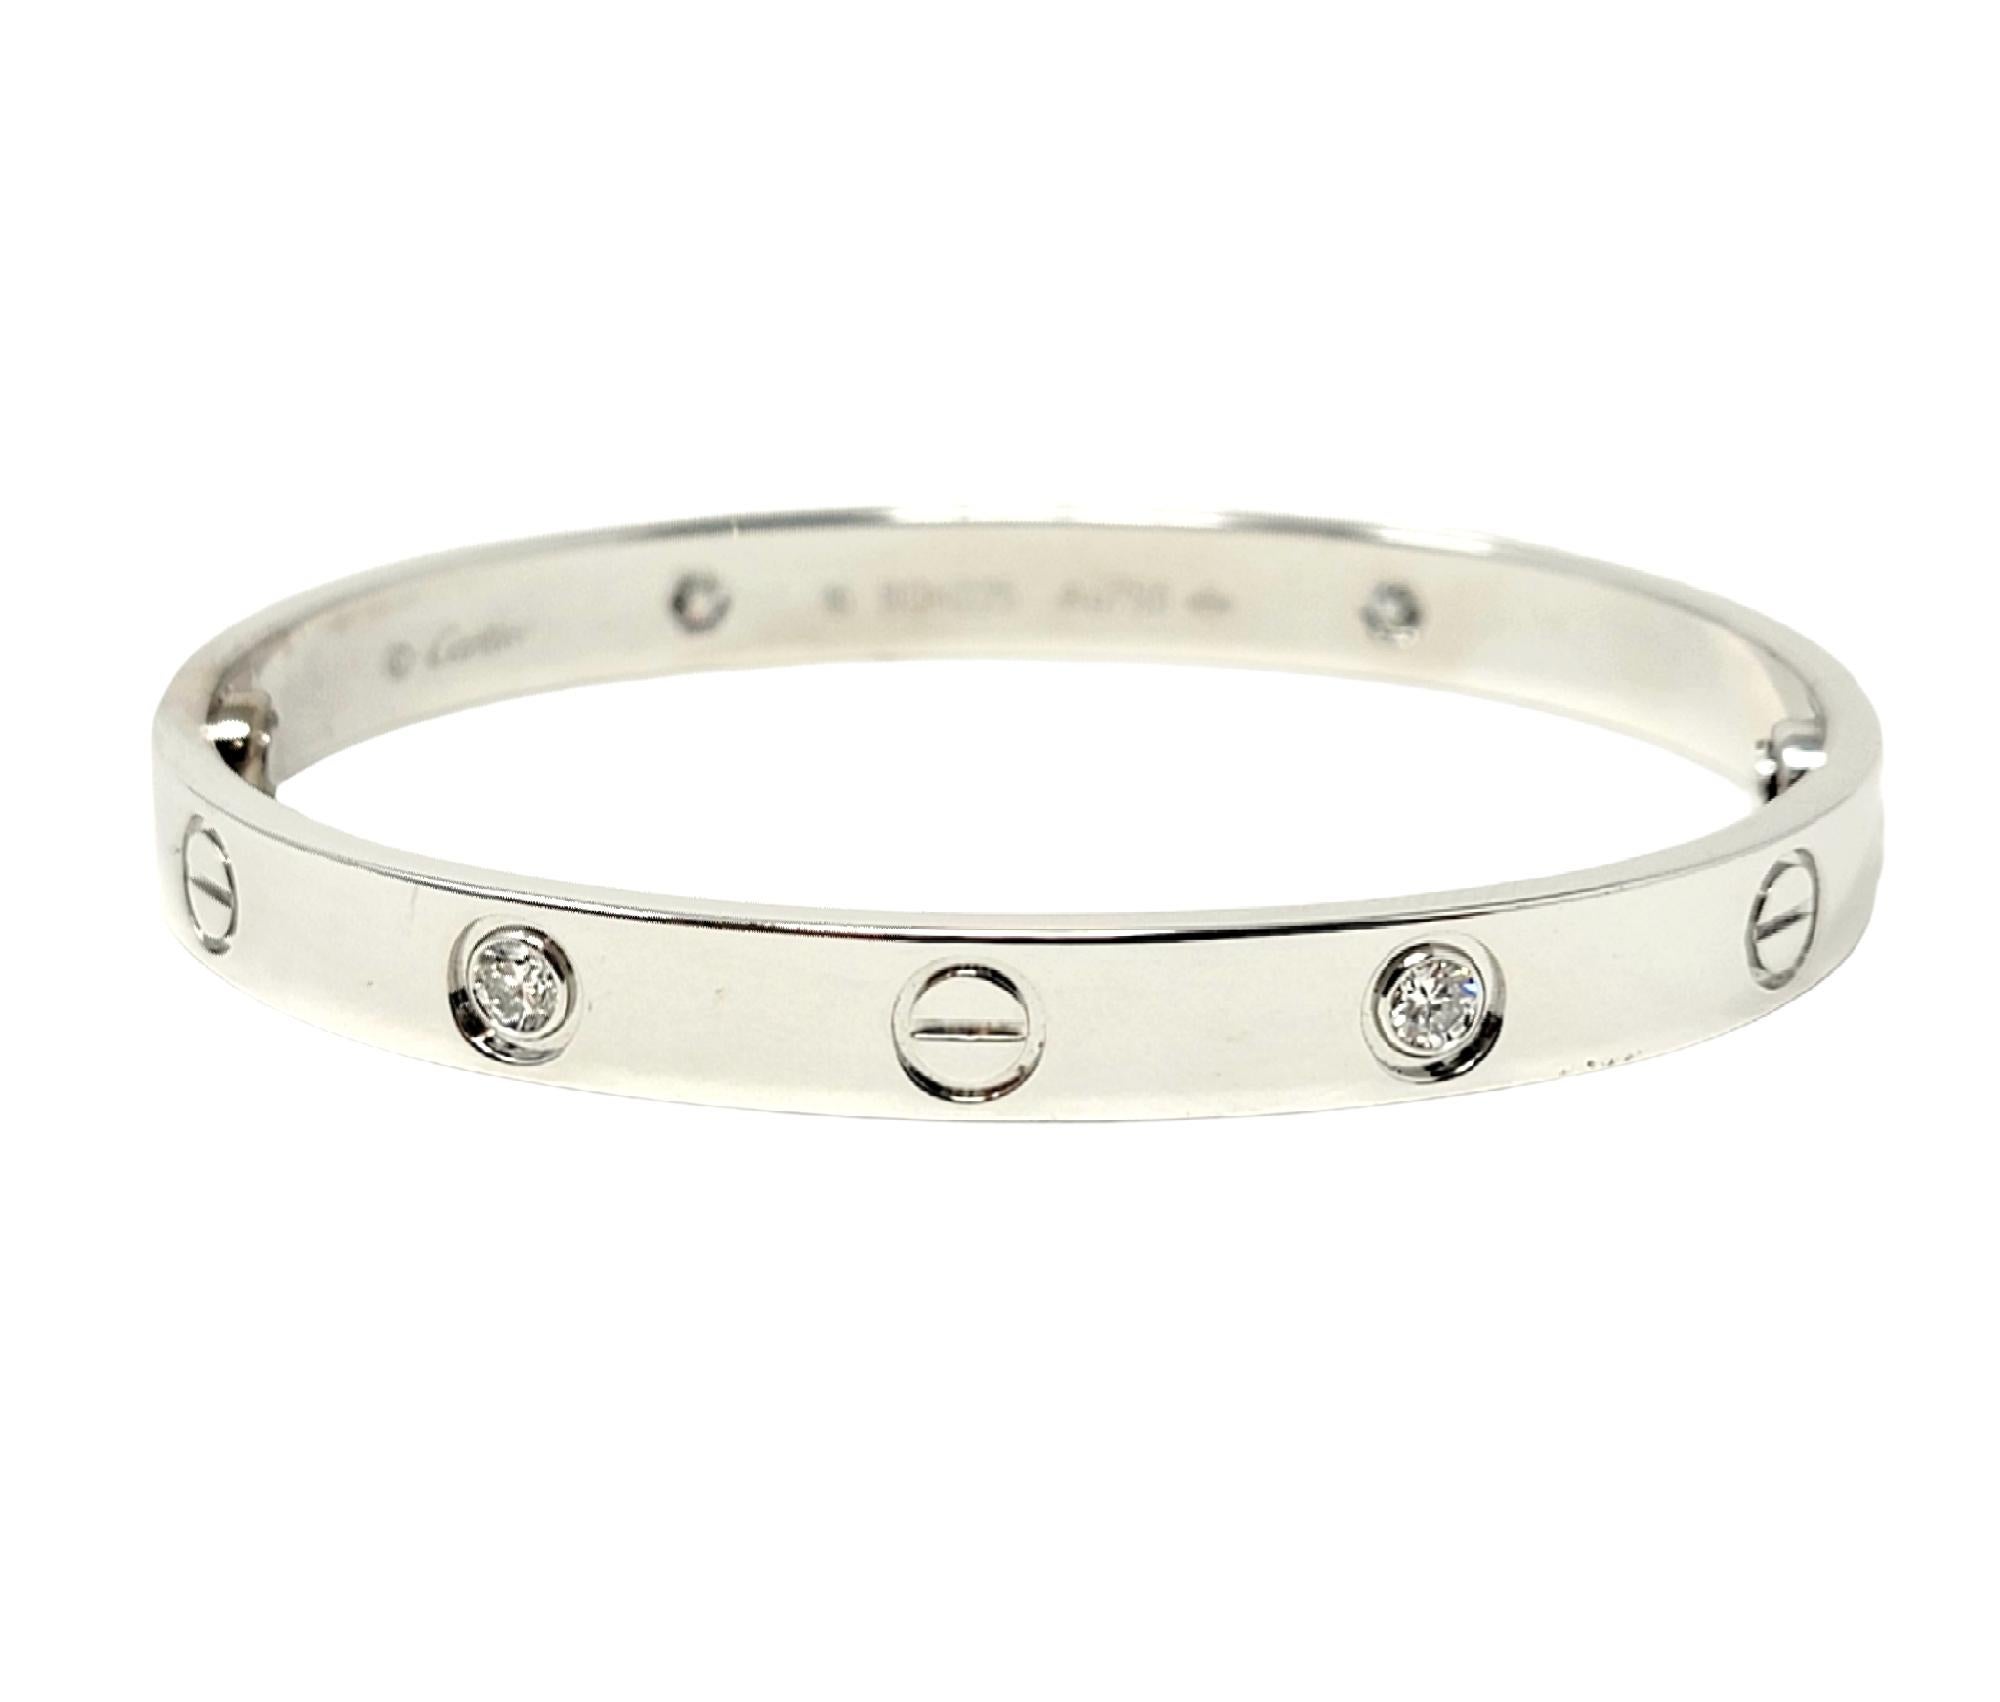 Iconic Love Collection bangle bracelet with diamonds from luxury jeweler, Cartier. Includes box, outer box, and screwdriver. This simple, yet effortlessly timeless piece makes a chic statement on the wrist. With its clean lines, perfect symmetry,